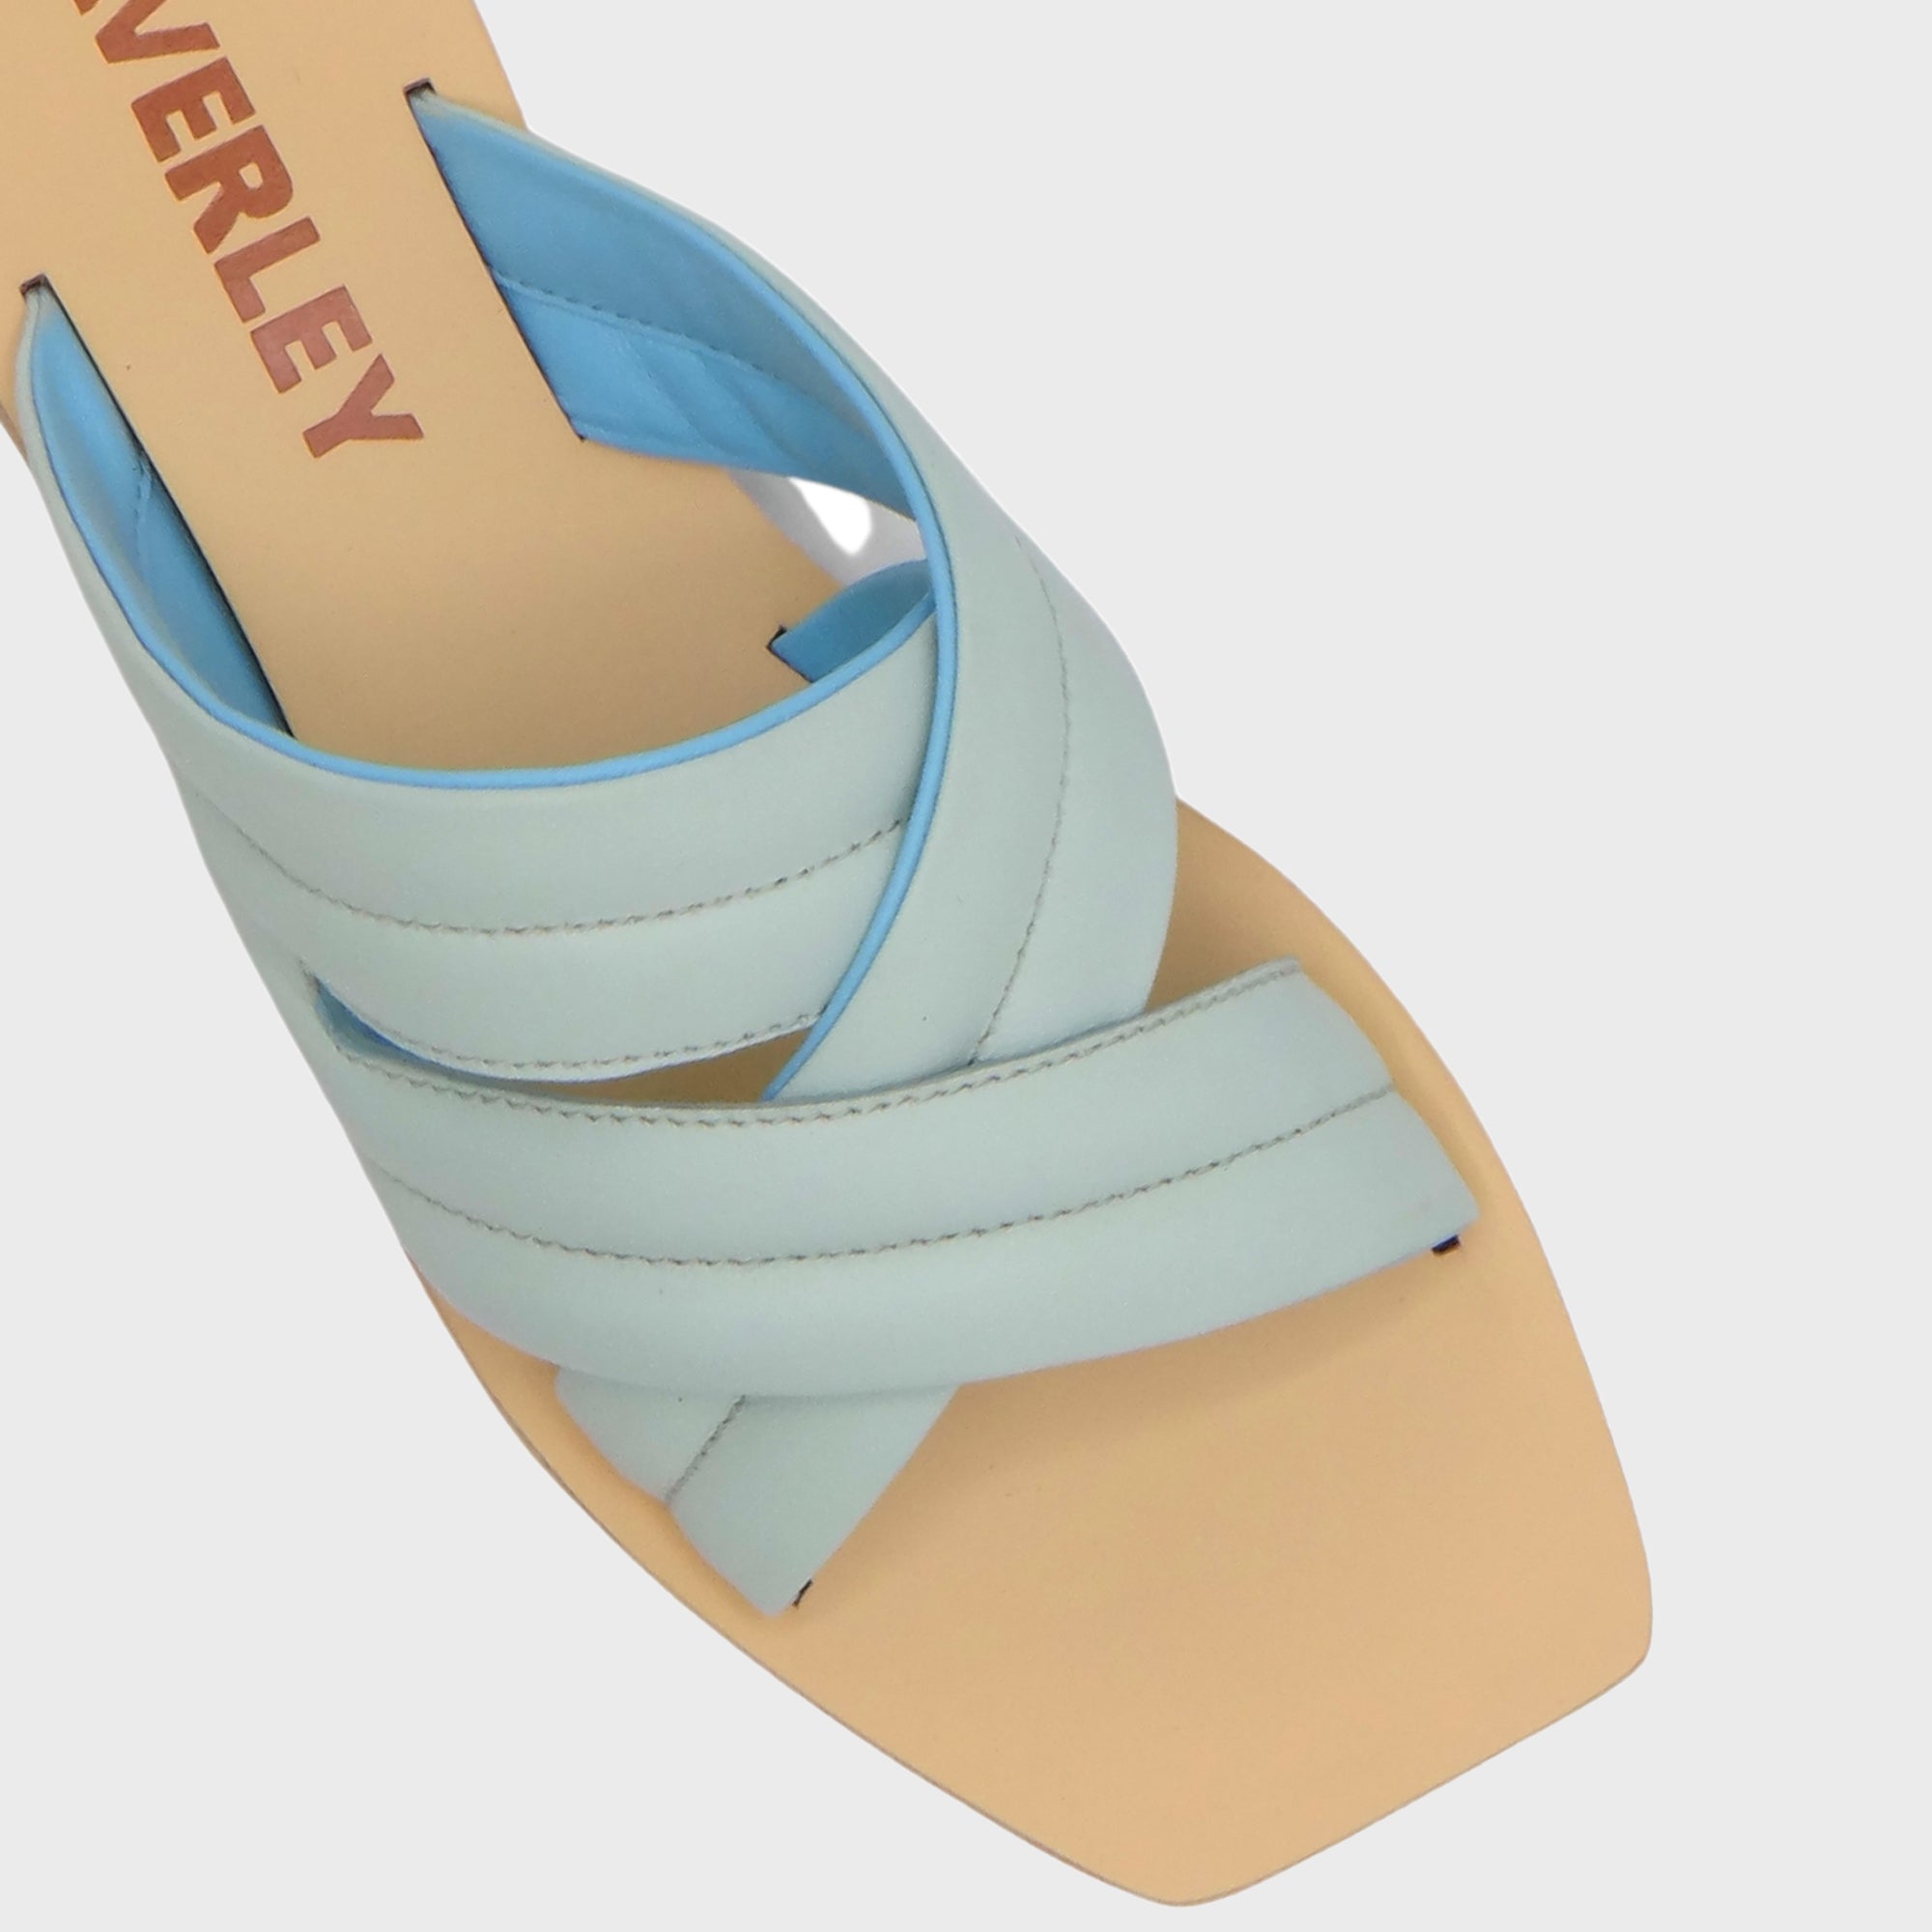 CAVERLEY Bennie Slide in Light Blue 23S516C Periwinkle Blue FROM EIGHTYWINGOLD - OFFICIAL BRAND PARTNER